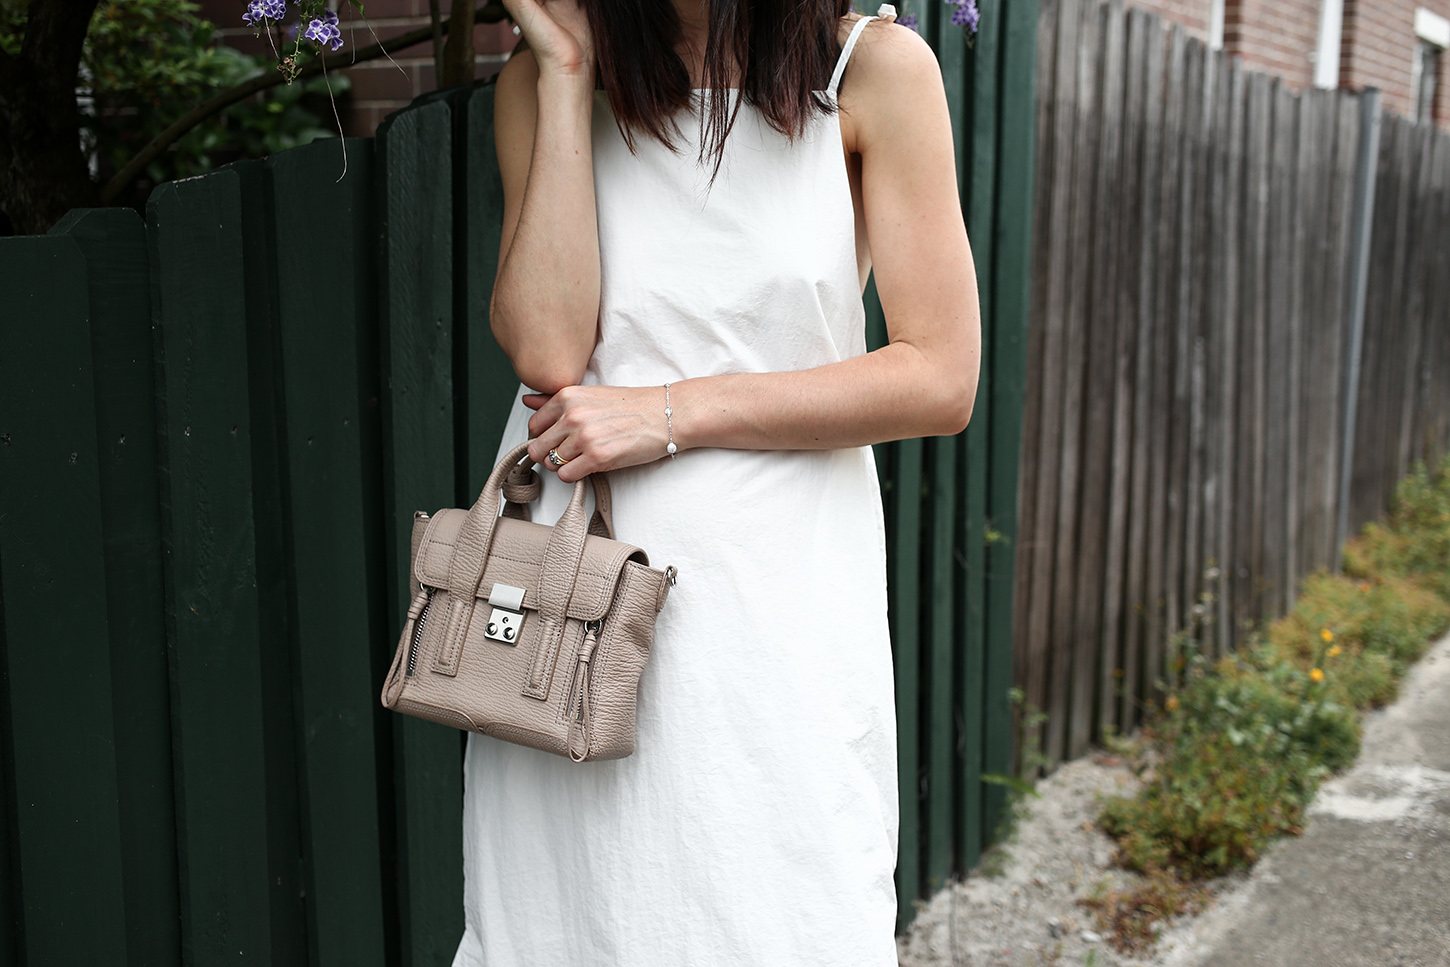 Minimal Outfit wearing white dress and nude mules